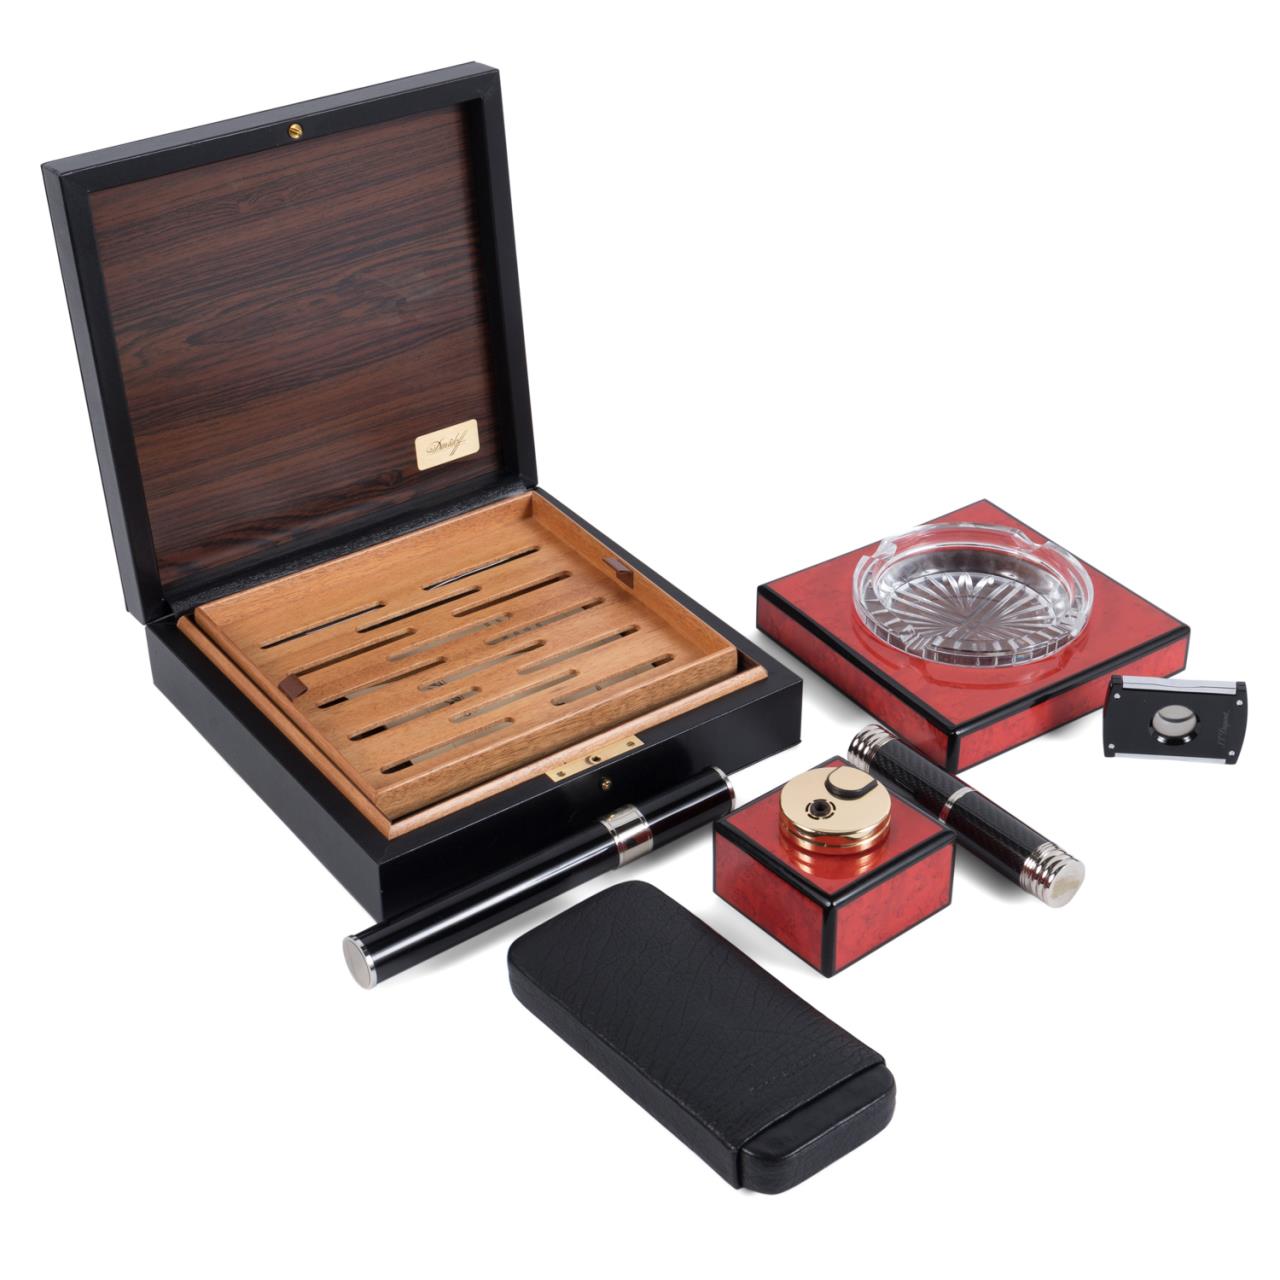 7PC GROUP OF CIGAR ACCESSORIES